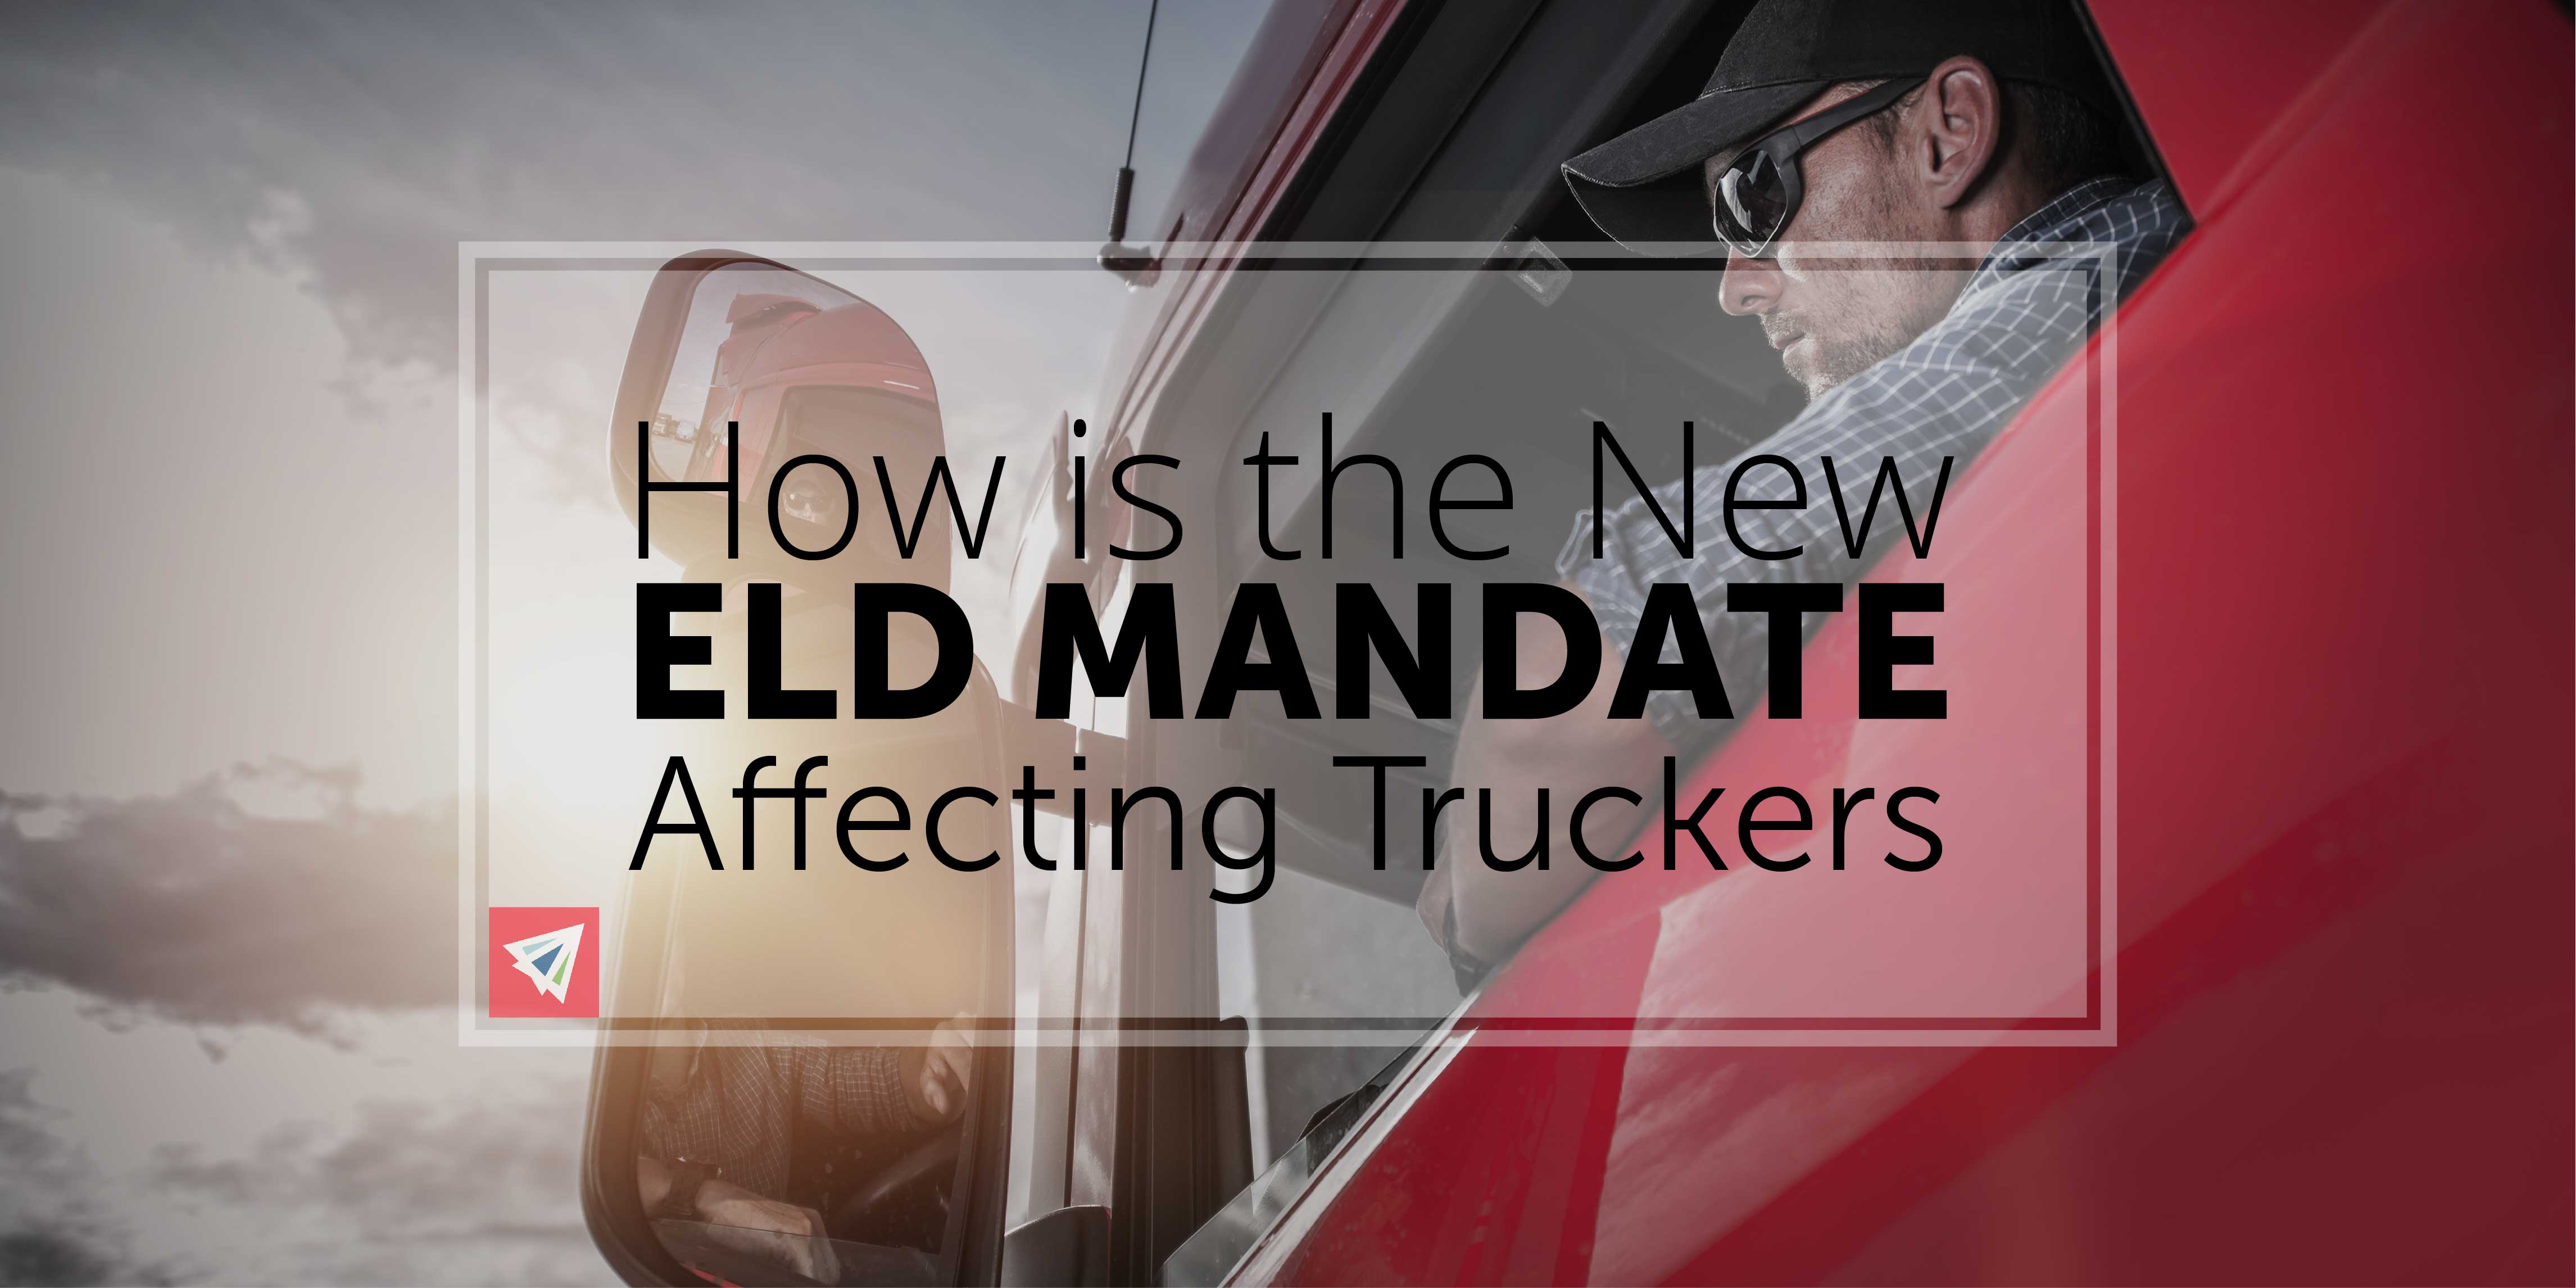 How is the New ELD Mandate Affecting Truckers?